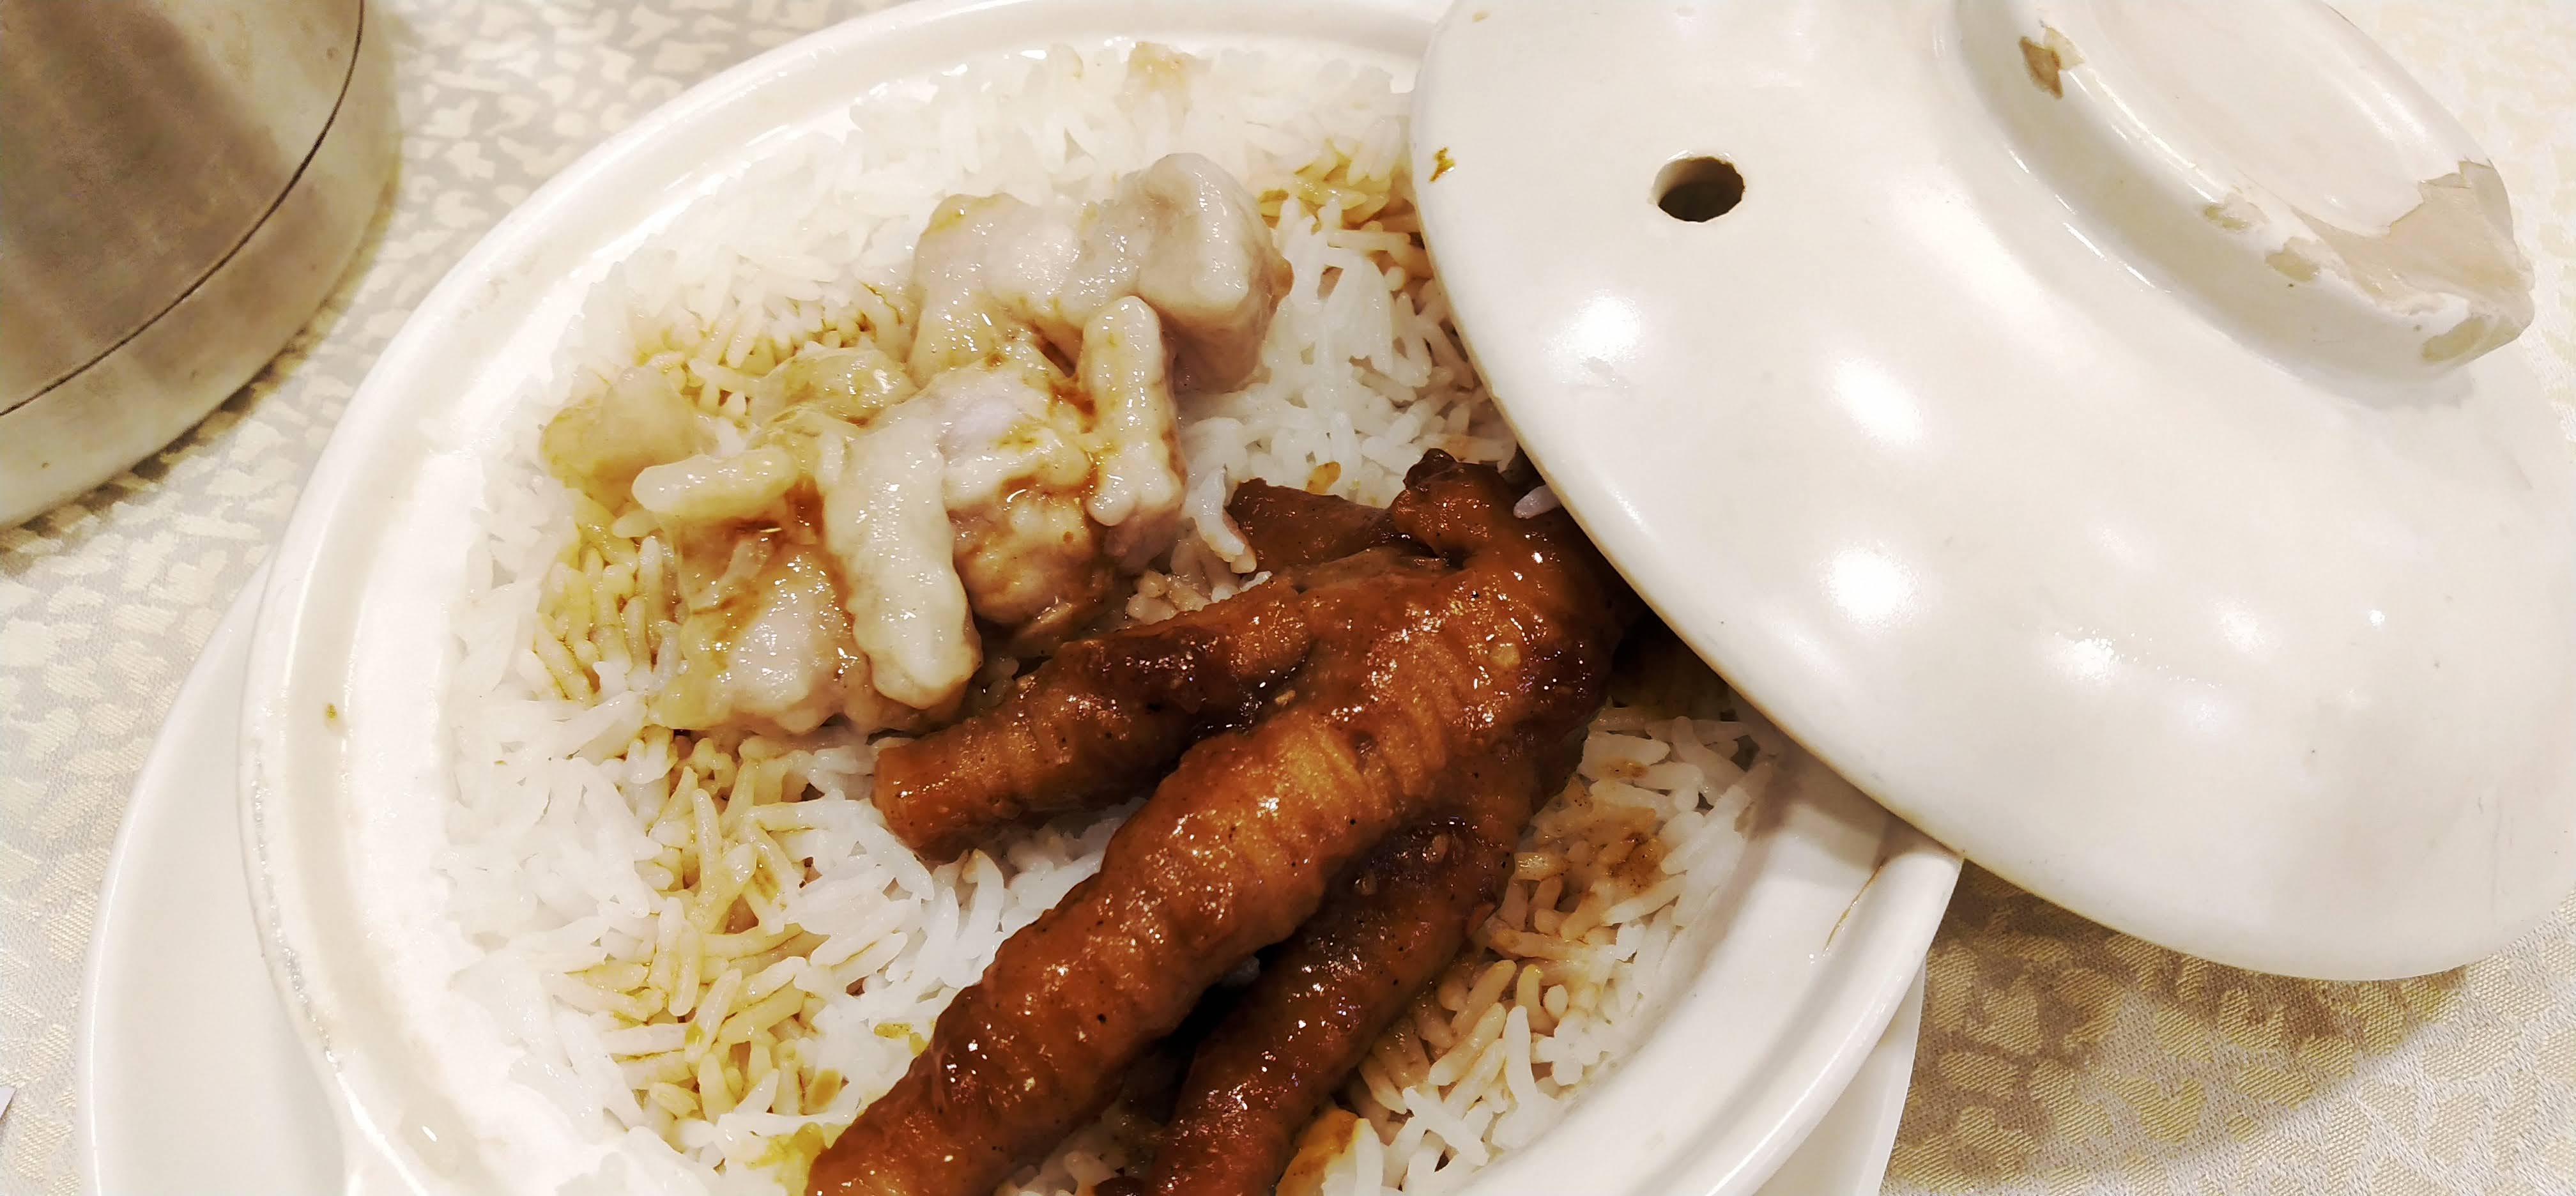 Clay pot steamed rice with pork ribs and chicken feet